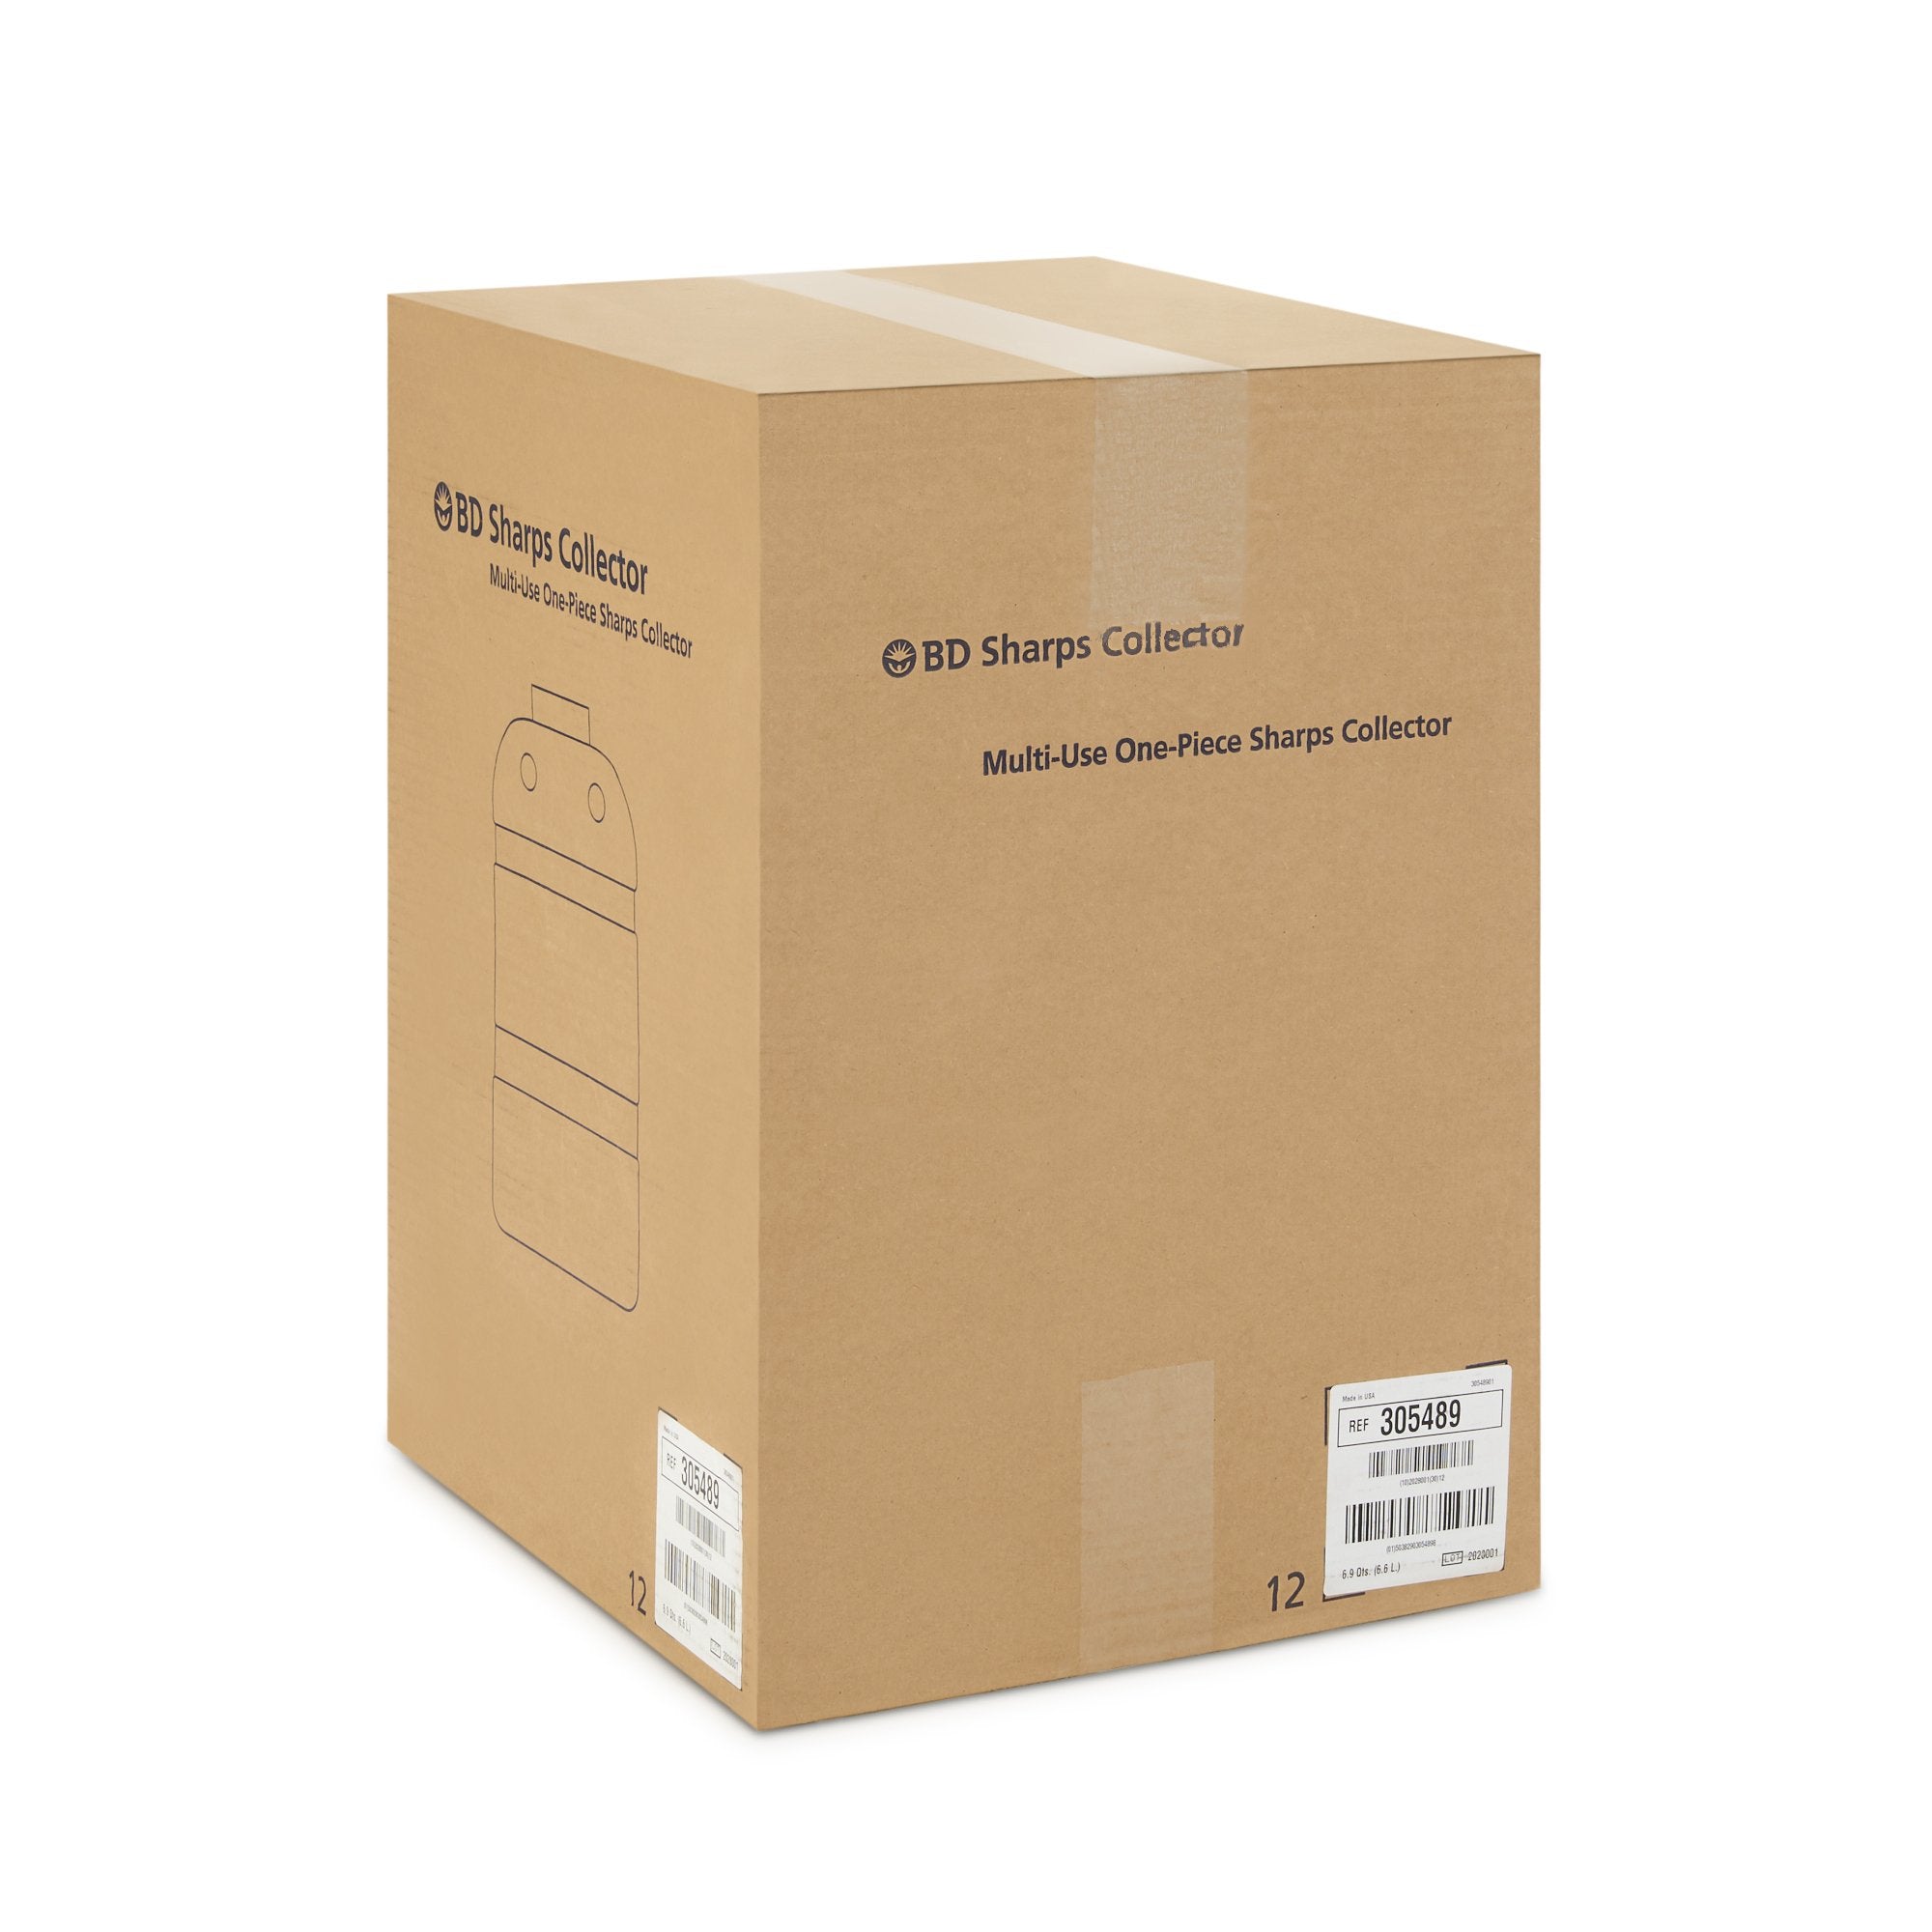 Sharps Container BD™ Red Base 11-1/2 H X 9-2/5 W X 5-3/10 D Inch Vertical Entry 1.725 Gallon